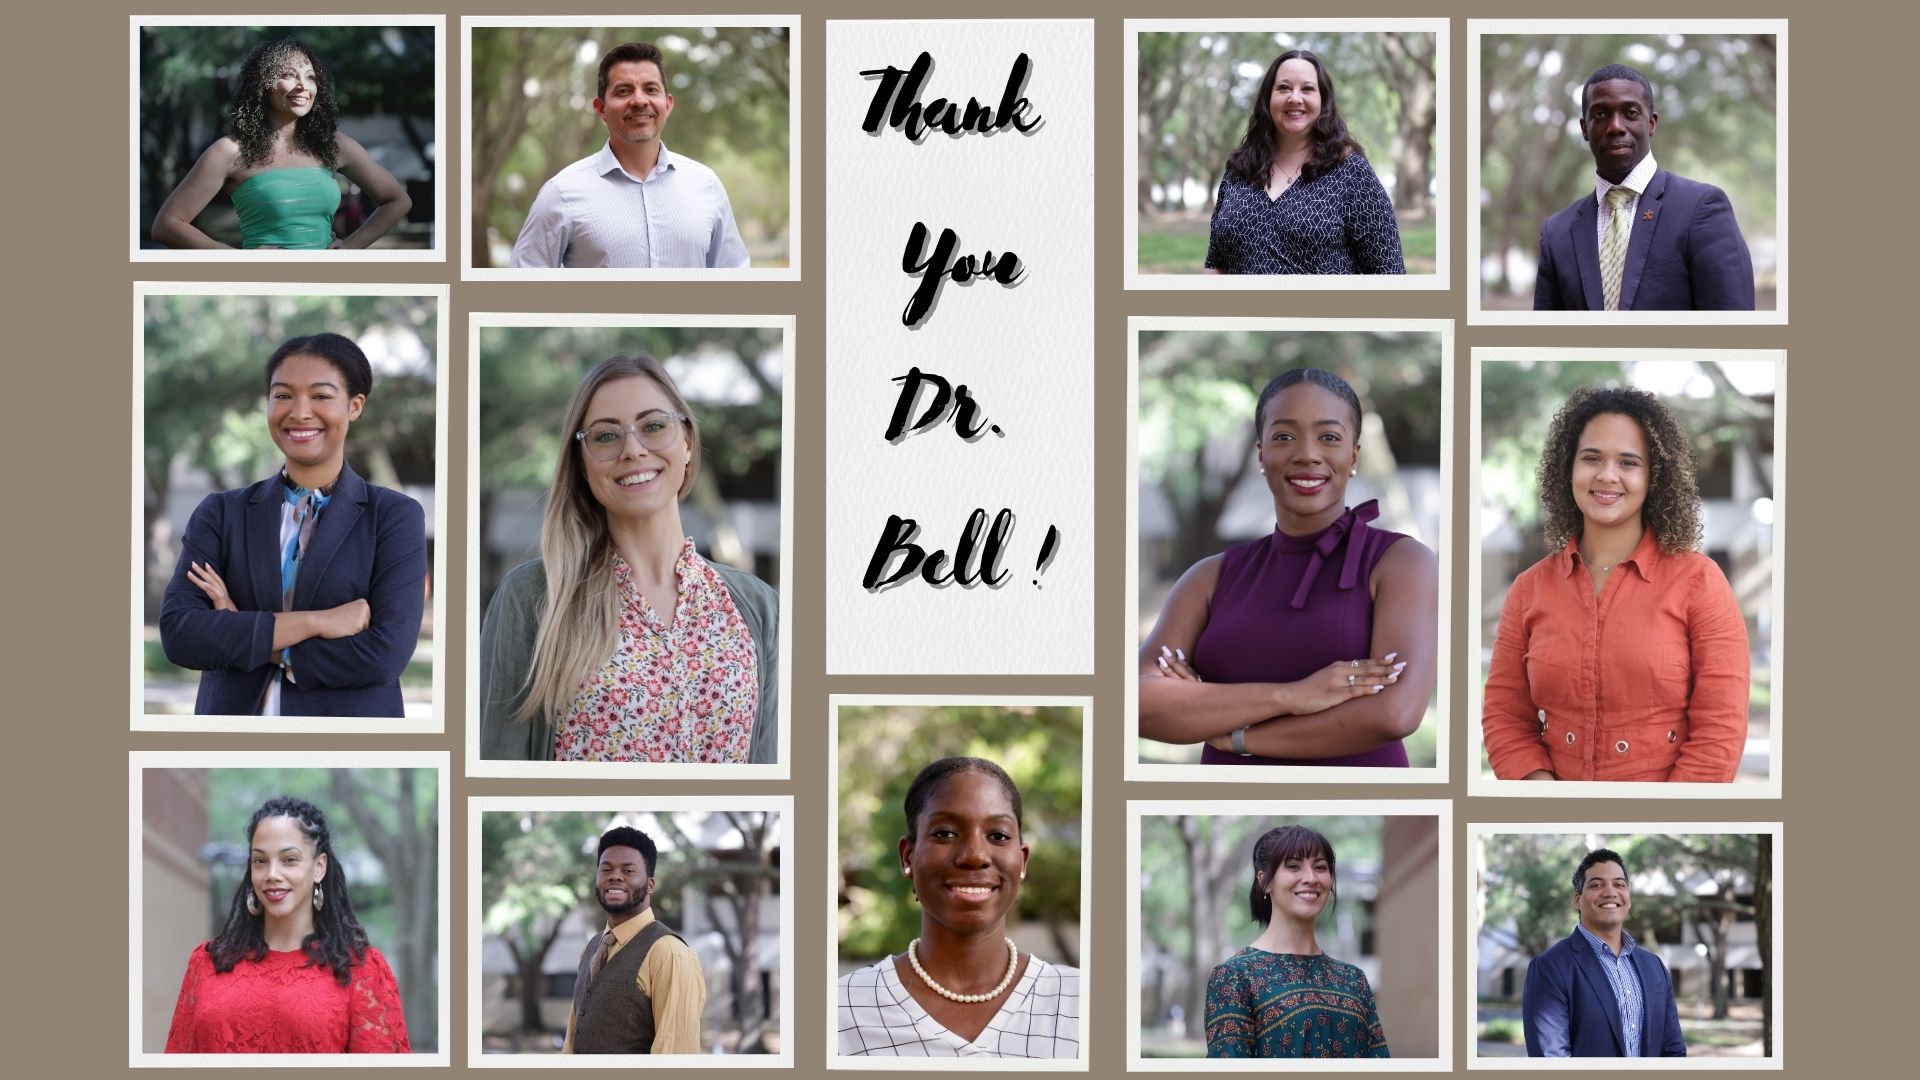 Thank you Dr. Bell!